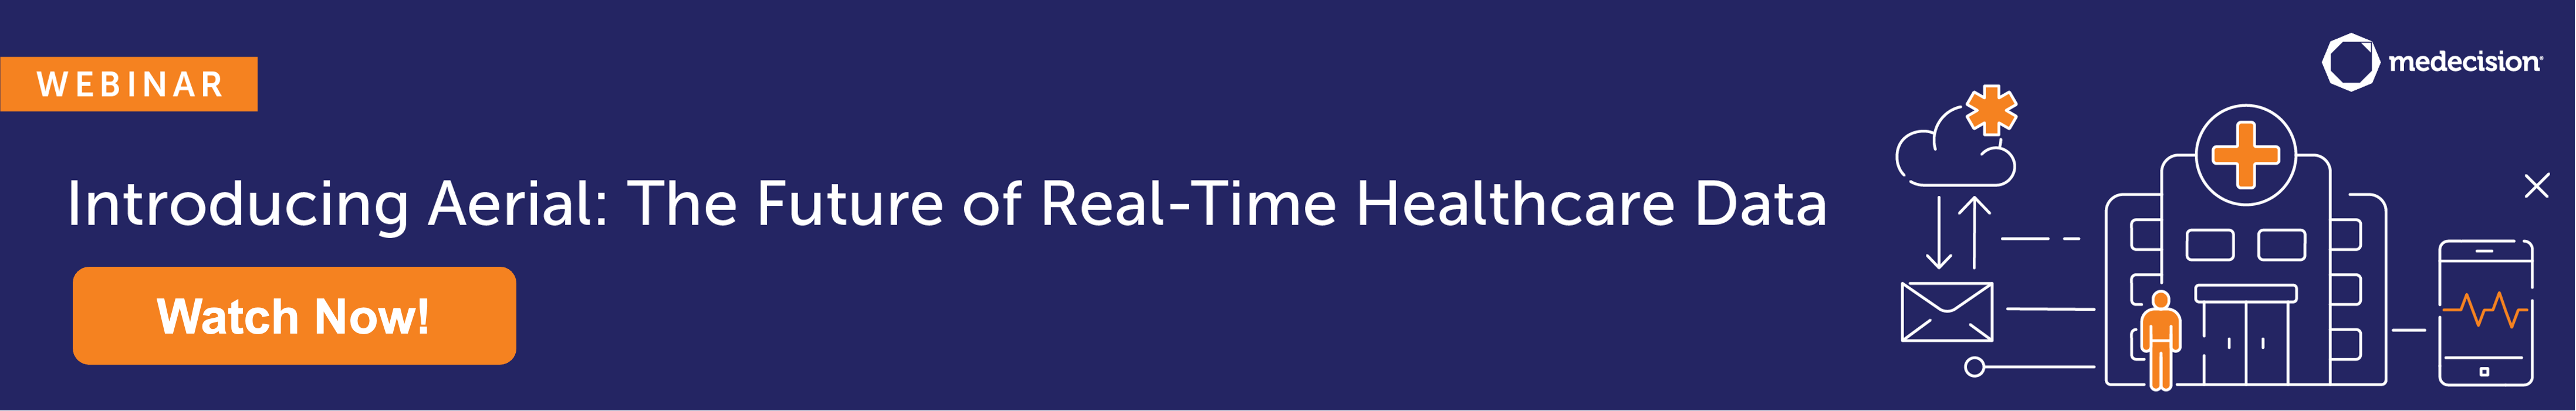 Webinar: Introducing Aerial, the Future of Real-Time Healthcare Data